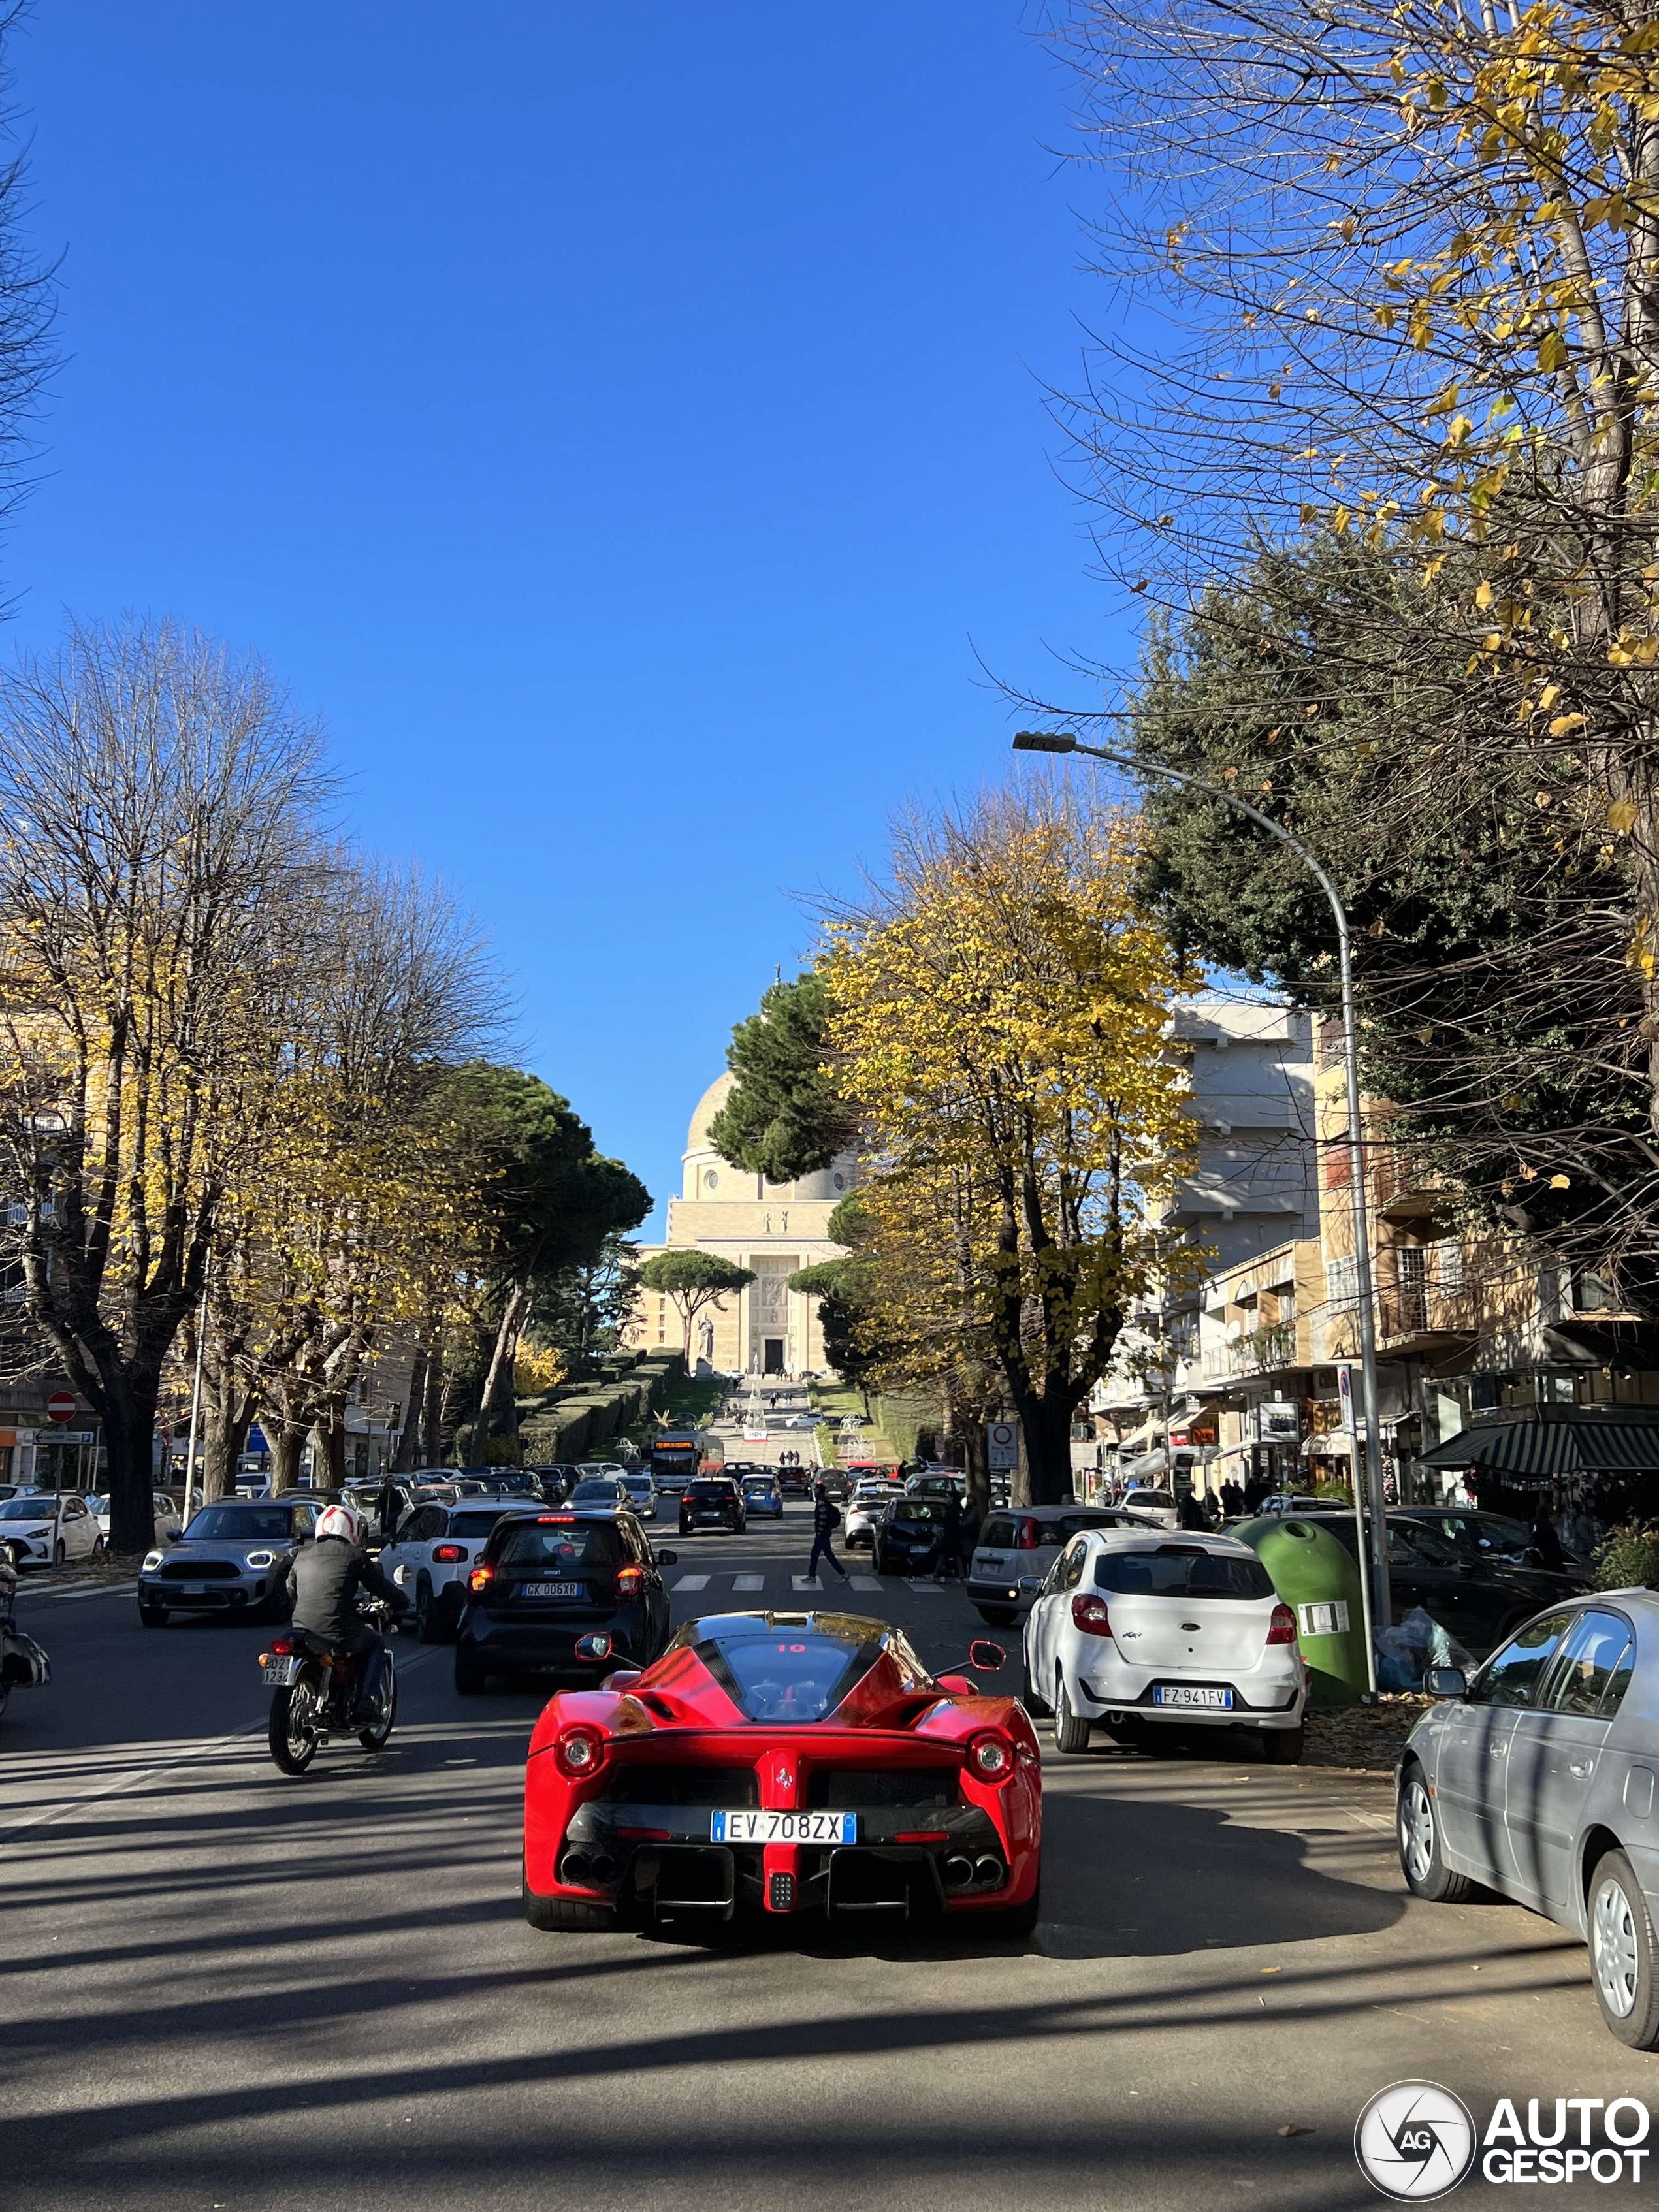 This is the very first Ferrari LaFerrari in Rome.